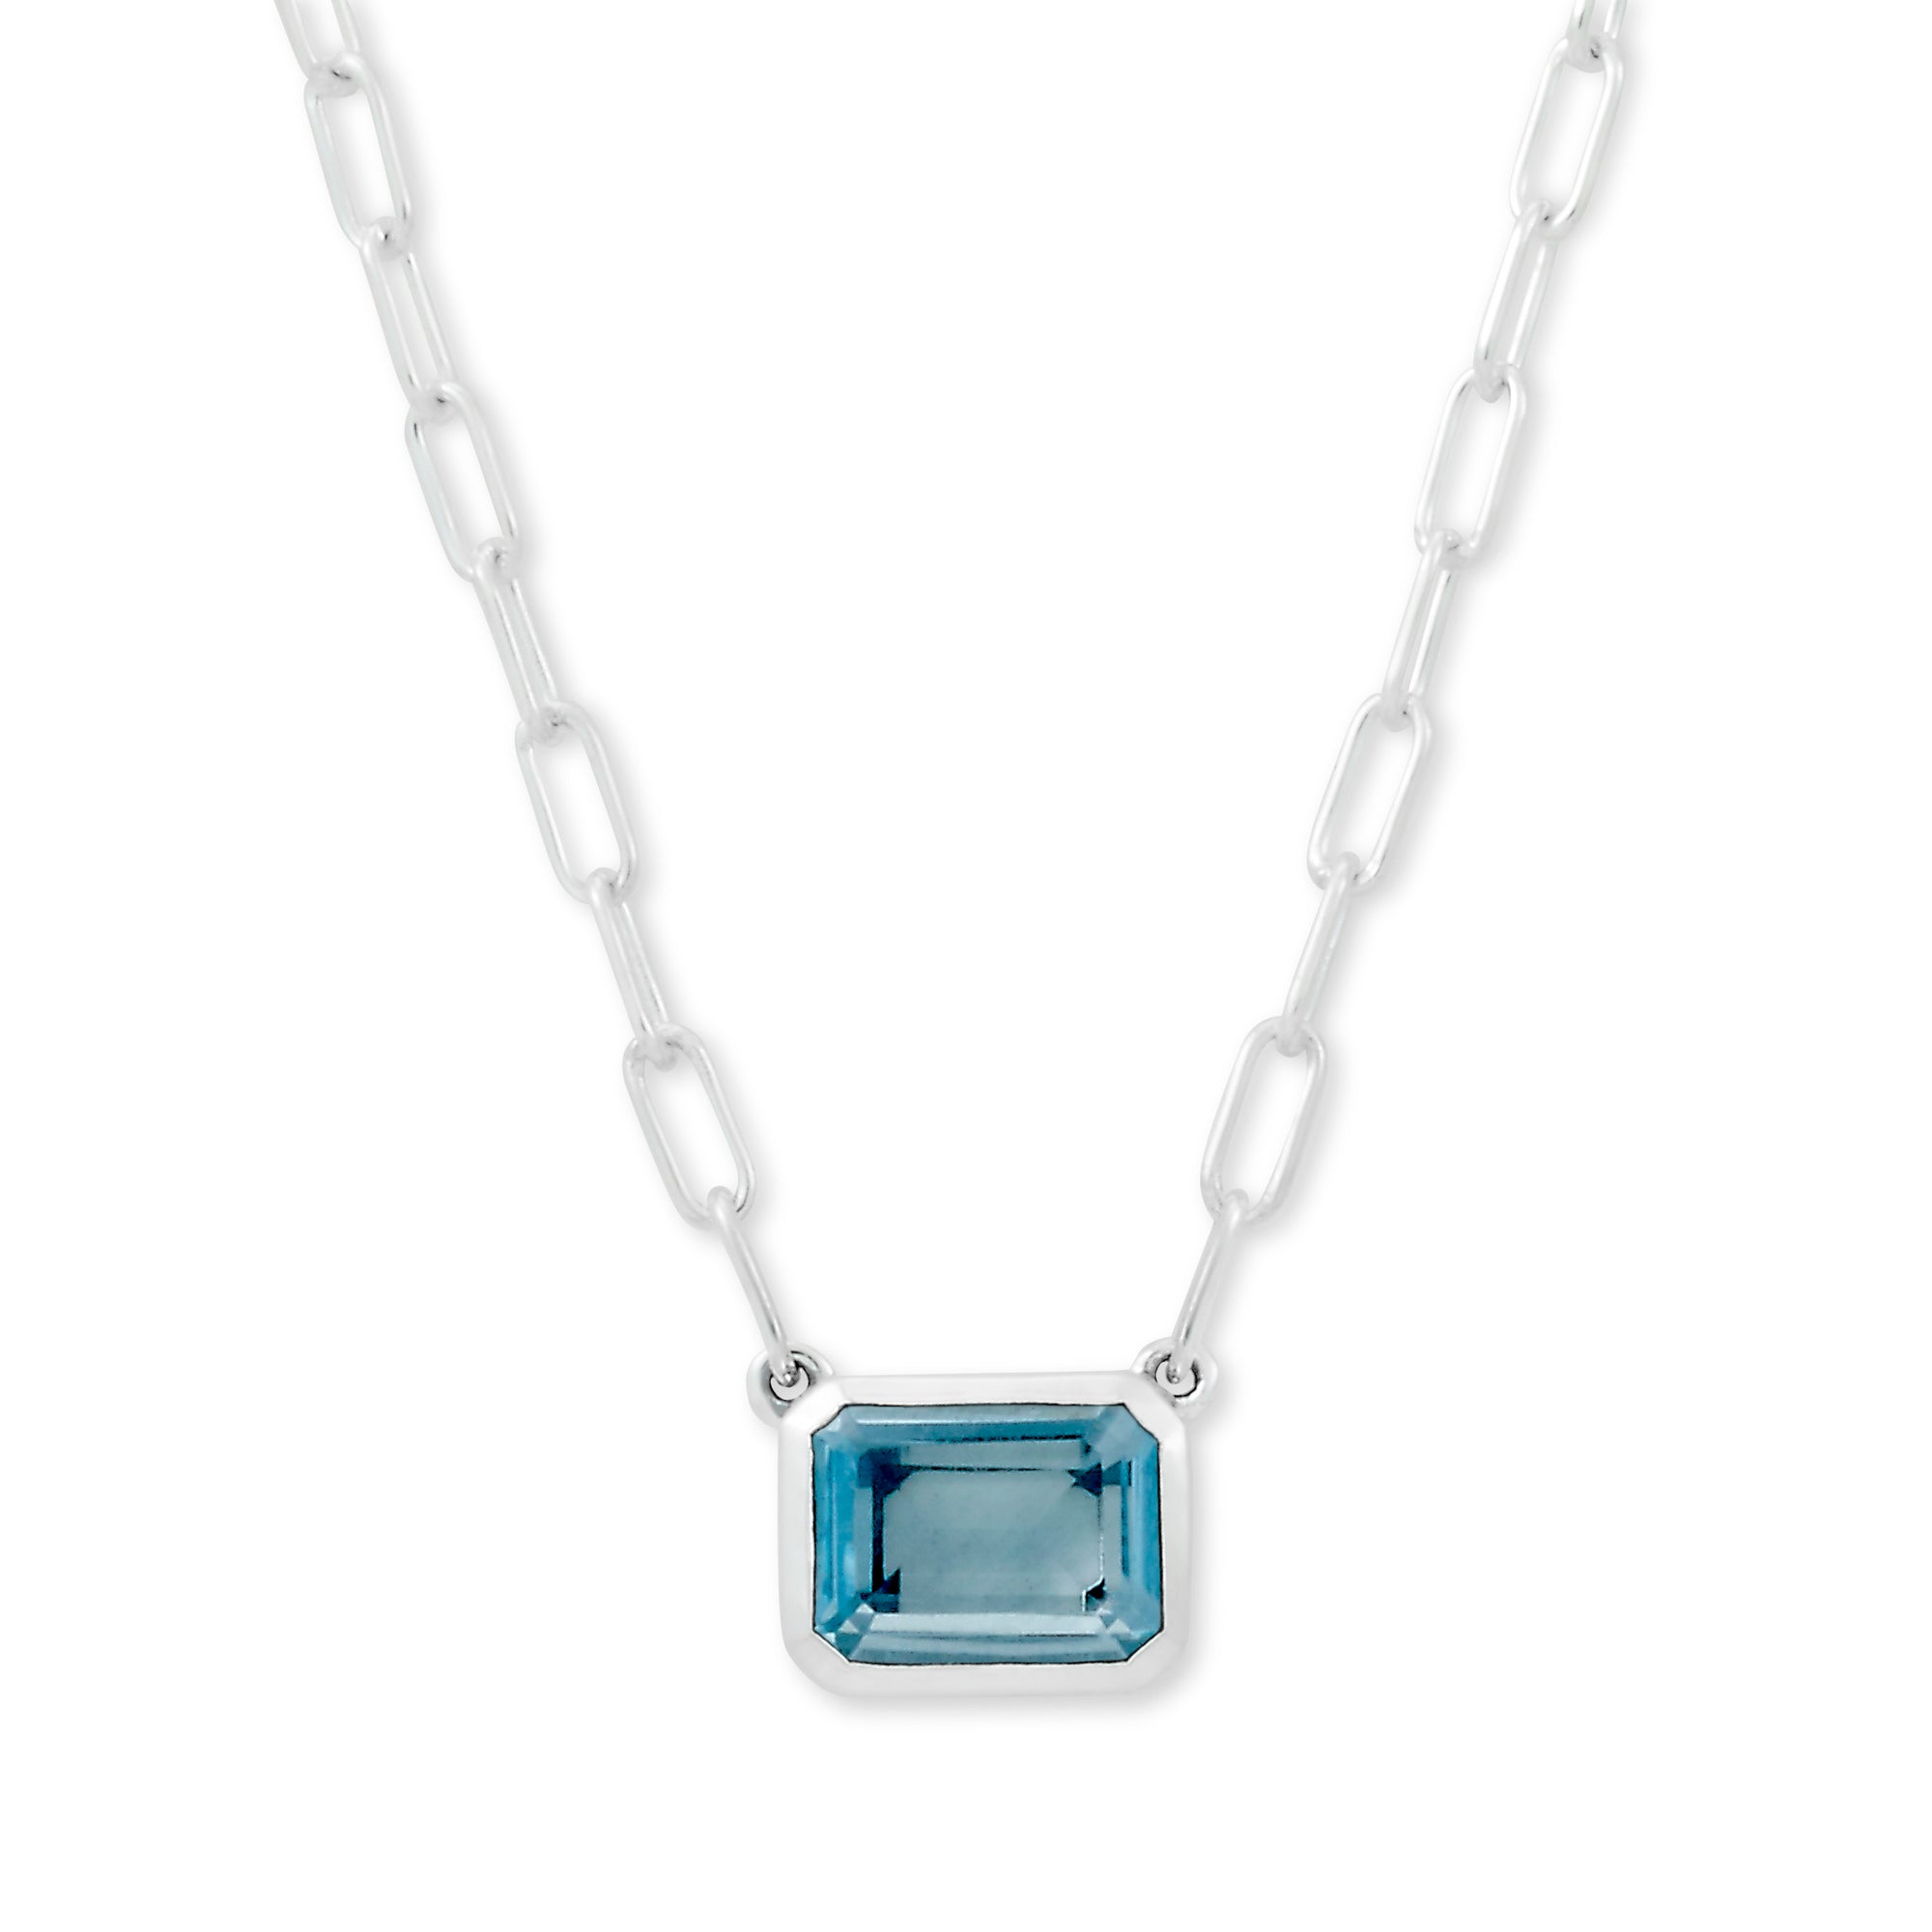 Blue Topaz Eirini Necklace available at Talisman Collection Fine Jewelers in El Dorado Hills, CA and online. Specs: Blue Topaz Eirini Necklace features an emerald-cut blue topaz solitaire measuring 7x9mm, set in Sterling Silver